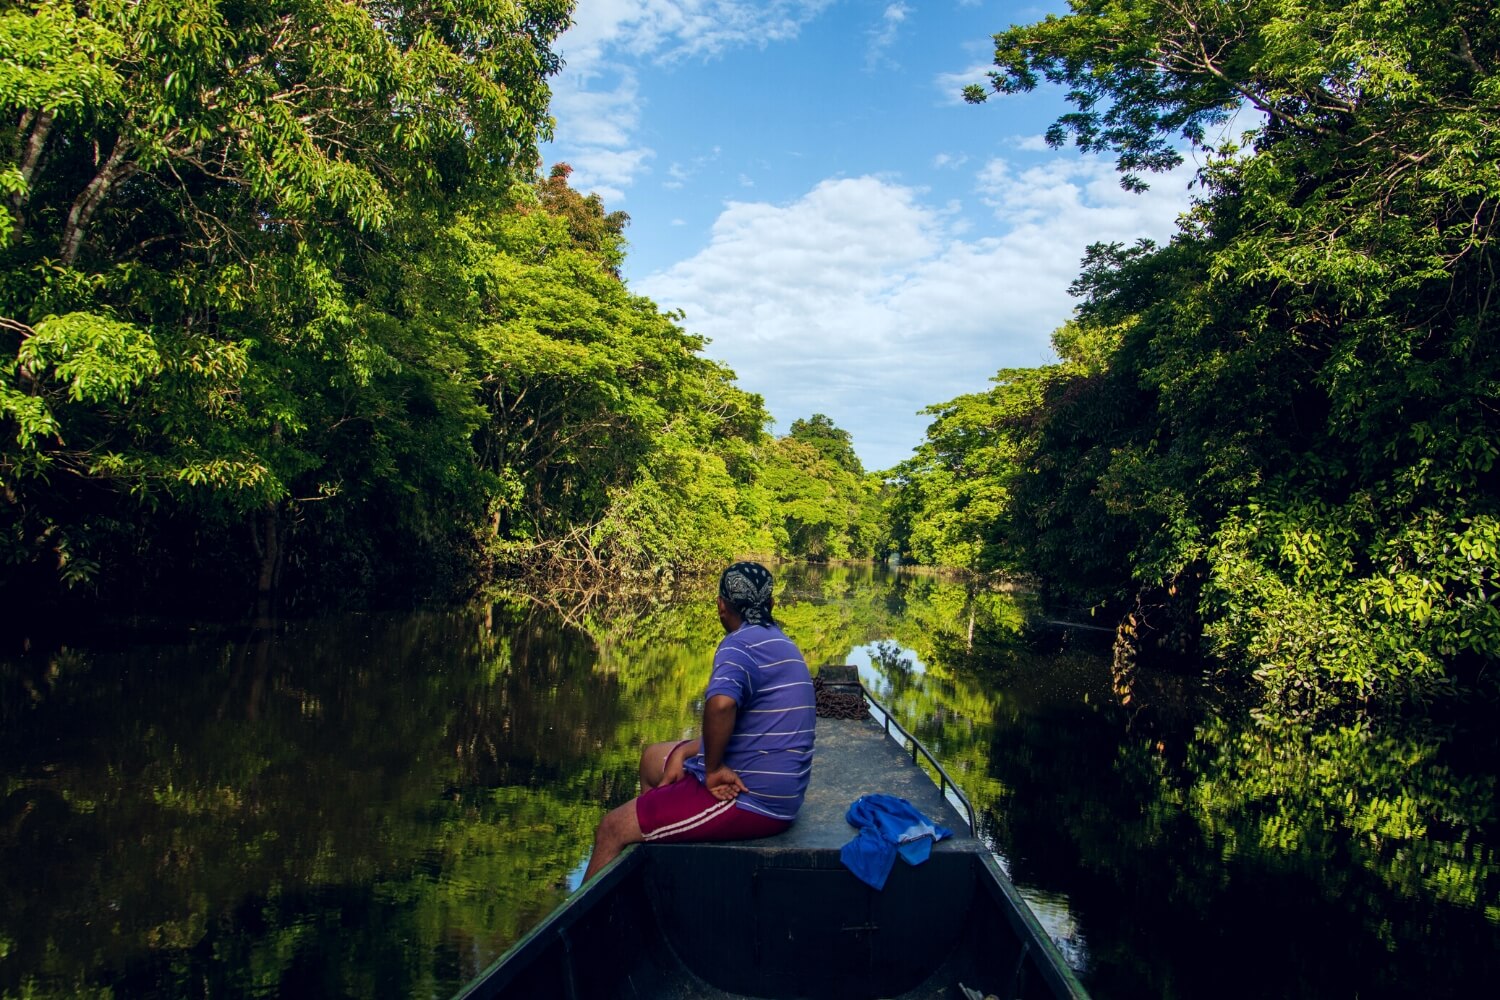 DISEASES THAT COULD AFFECT YOU ON YOUR TRIP TO THE AMAZON